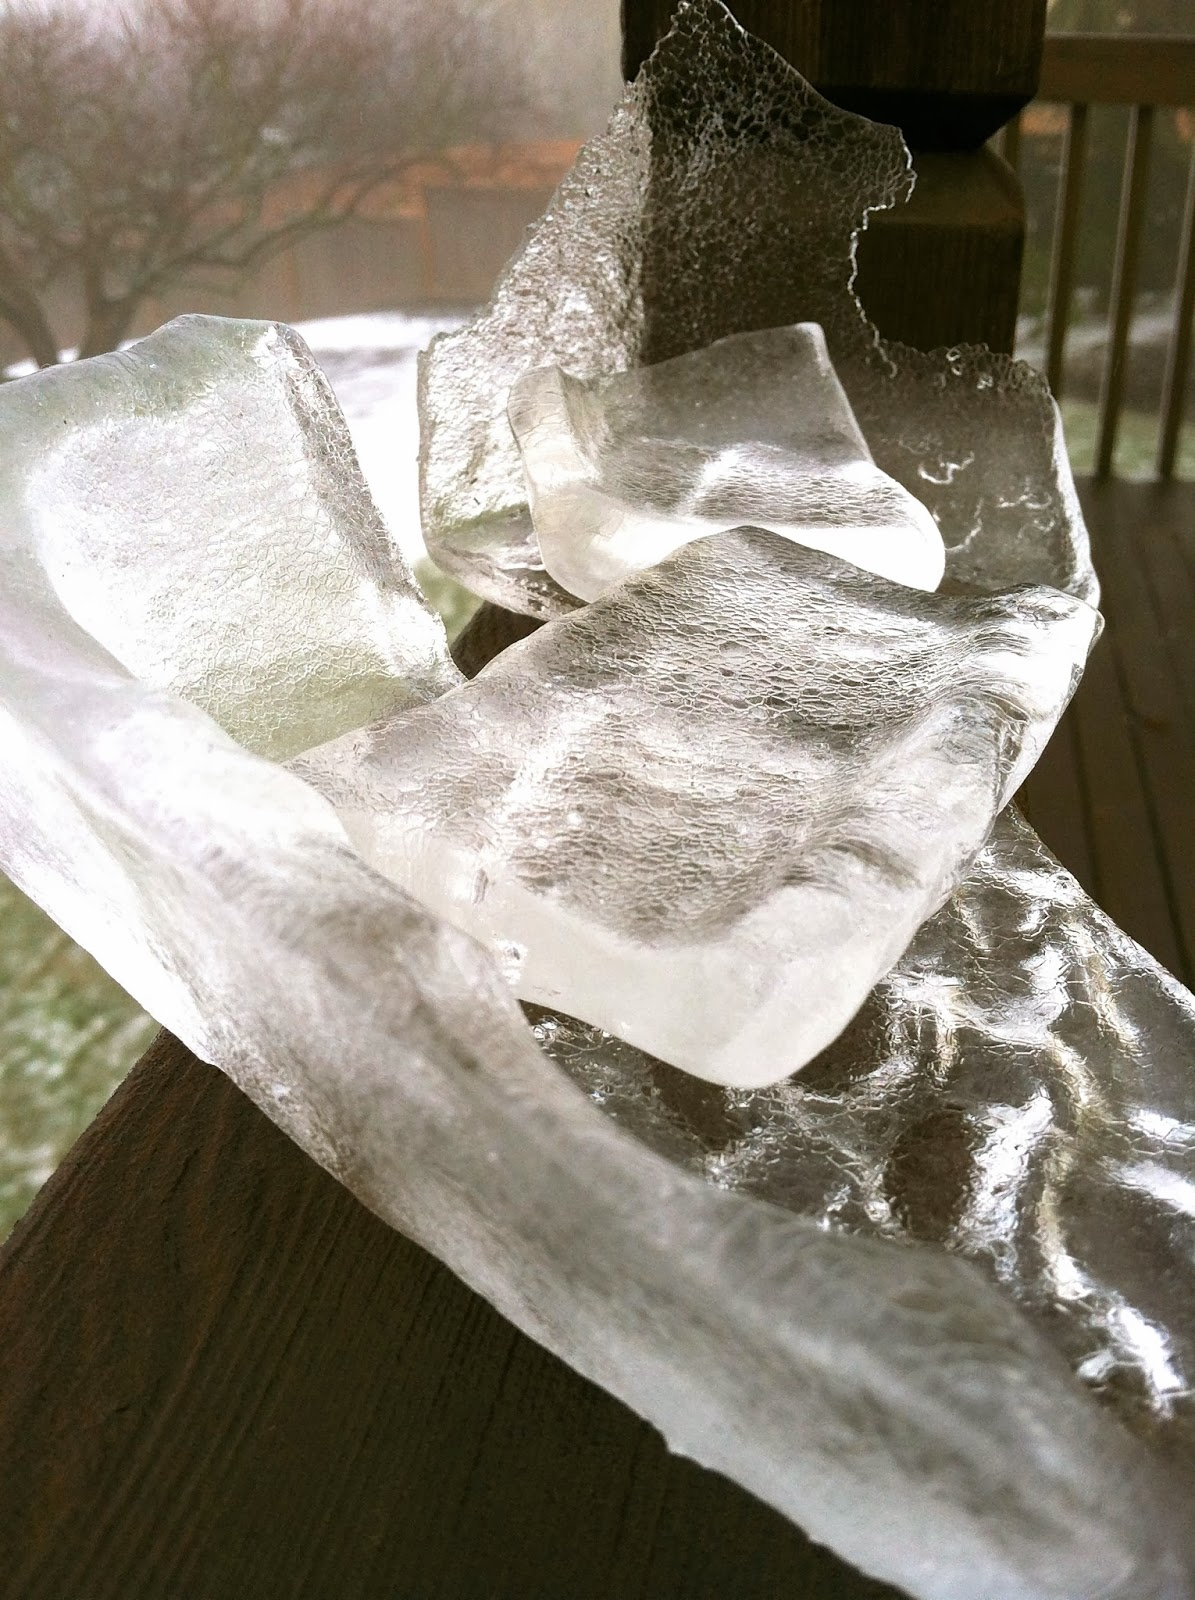 How to use ice or glycerin tubes to cool down the smoke from your glass bong without diluting it?